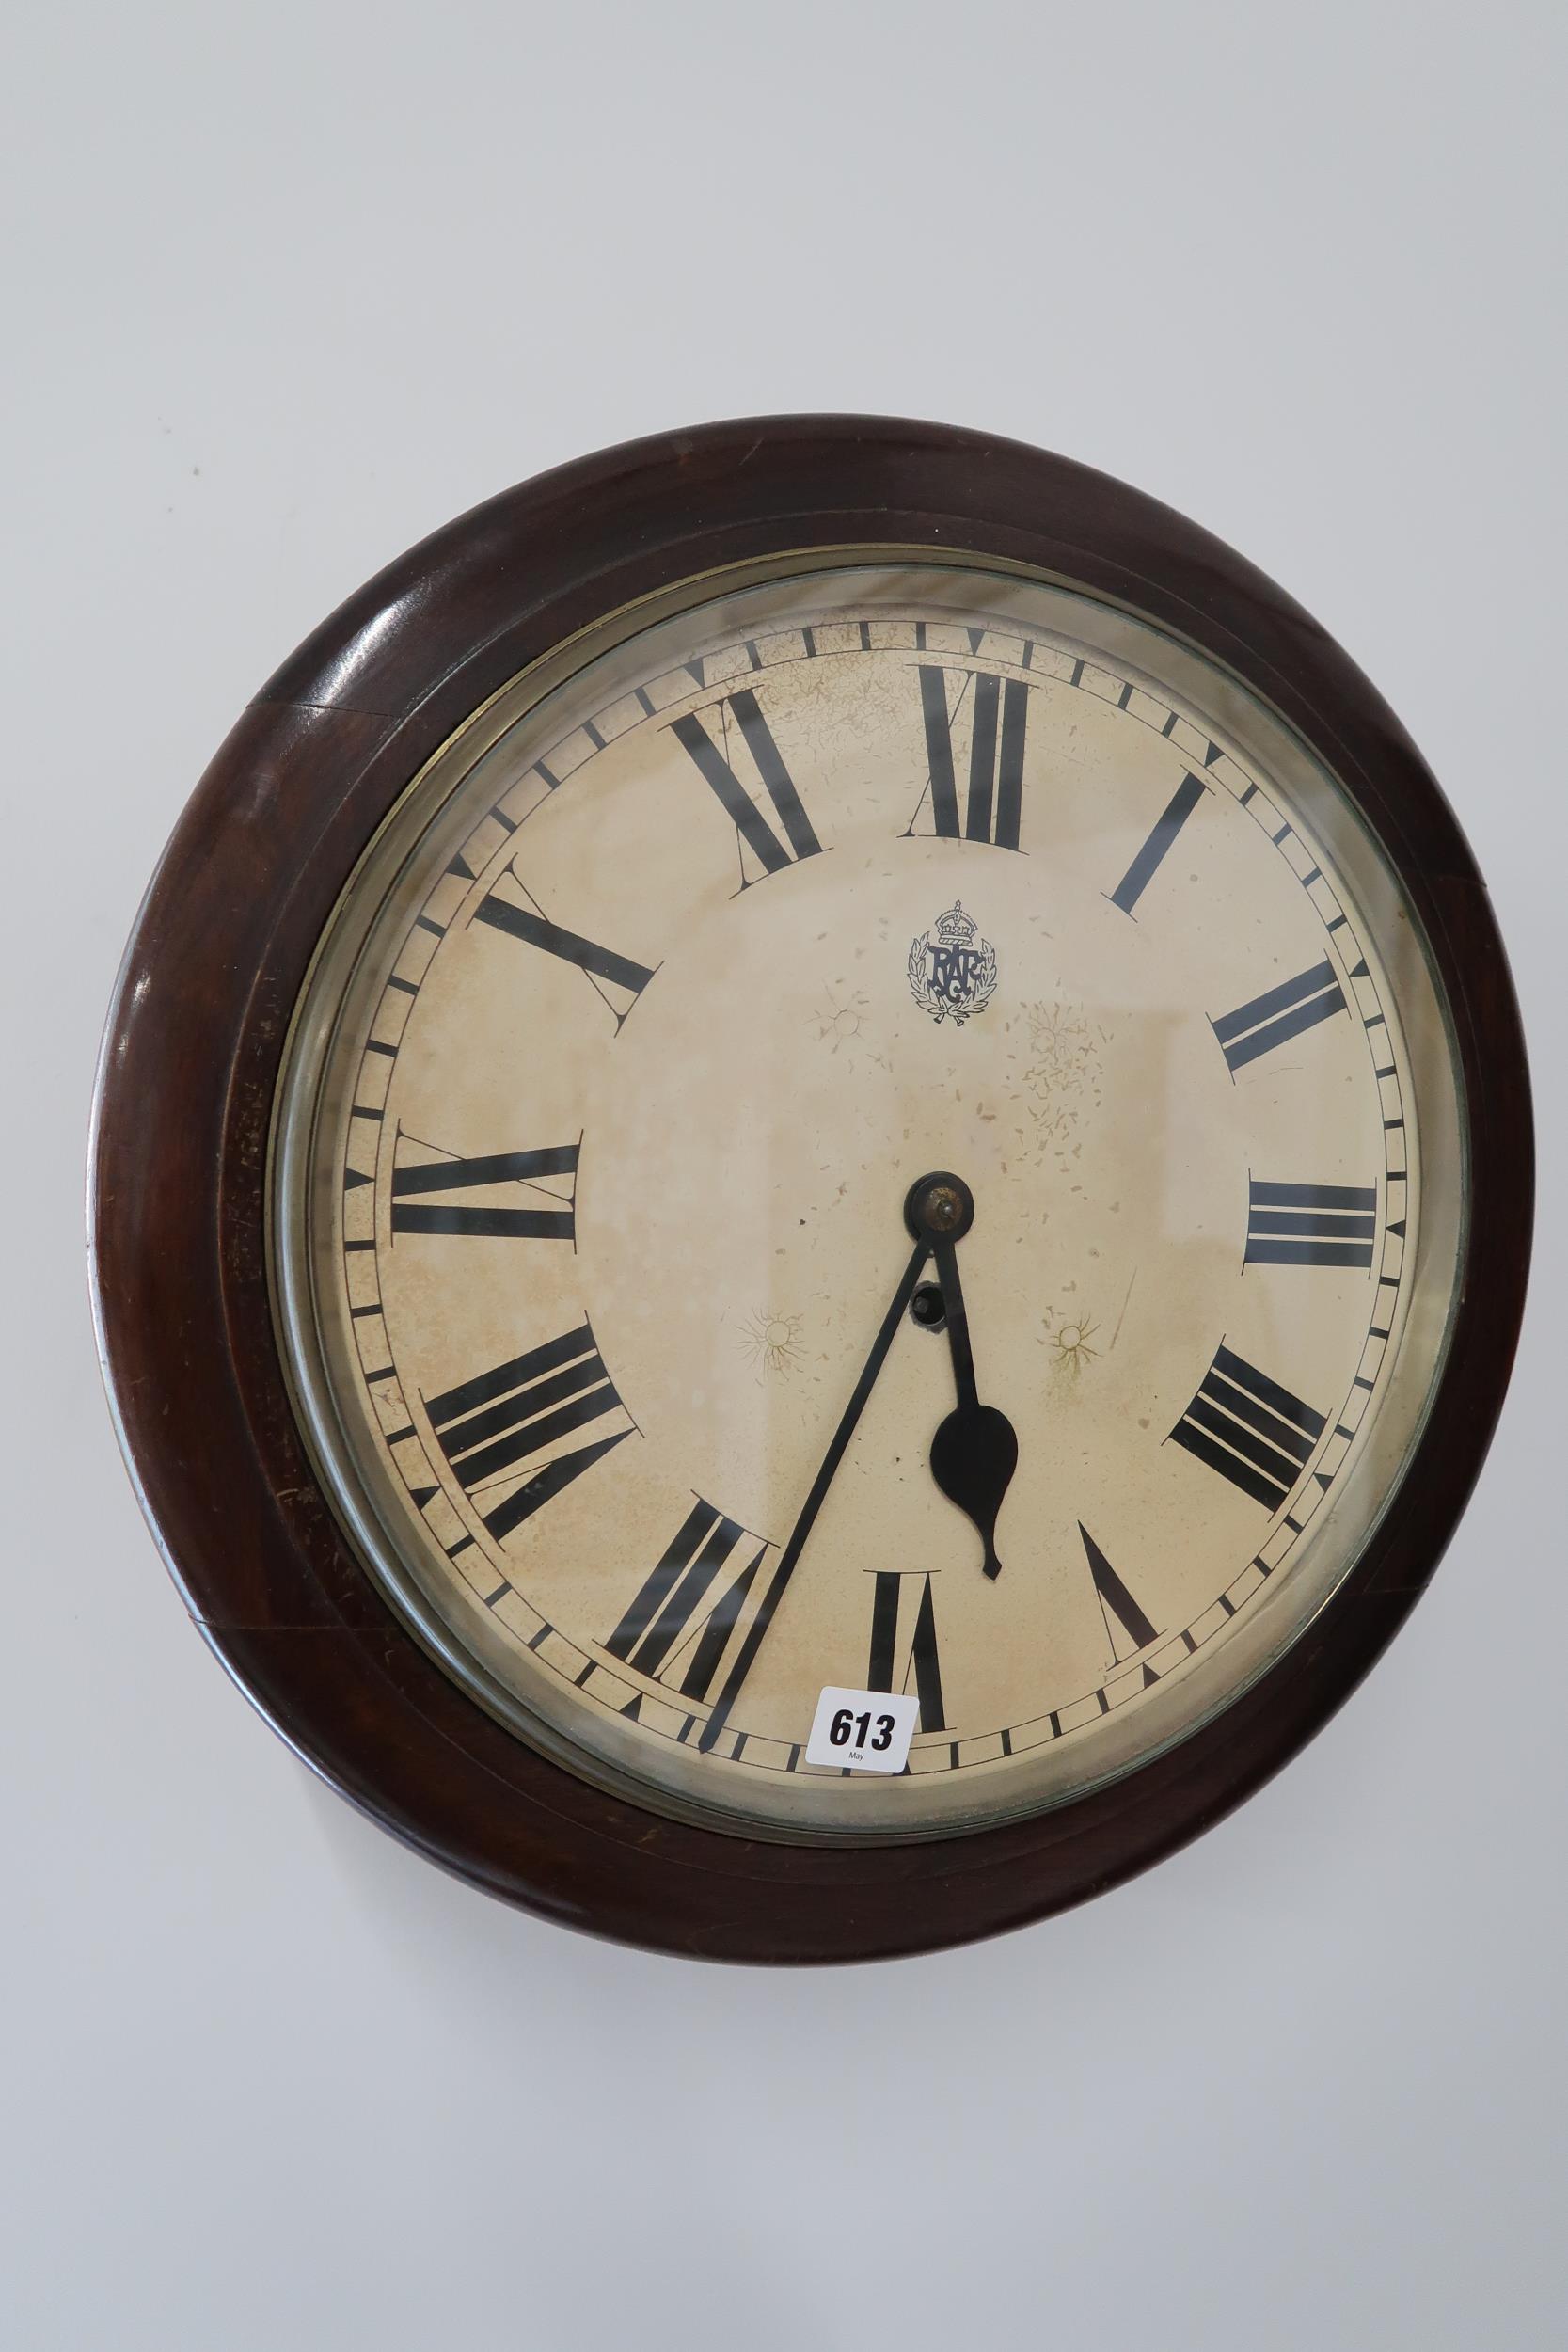 A RAF wall clock with a 14" dial, the fusee movement stamped Elliot with a key and pendulum